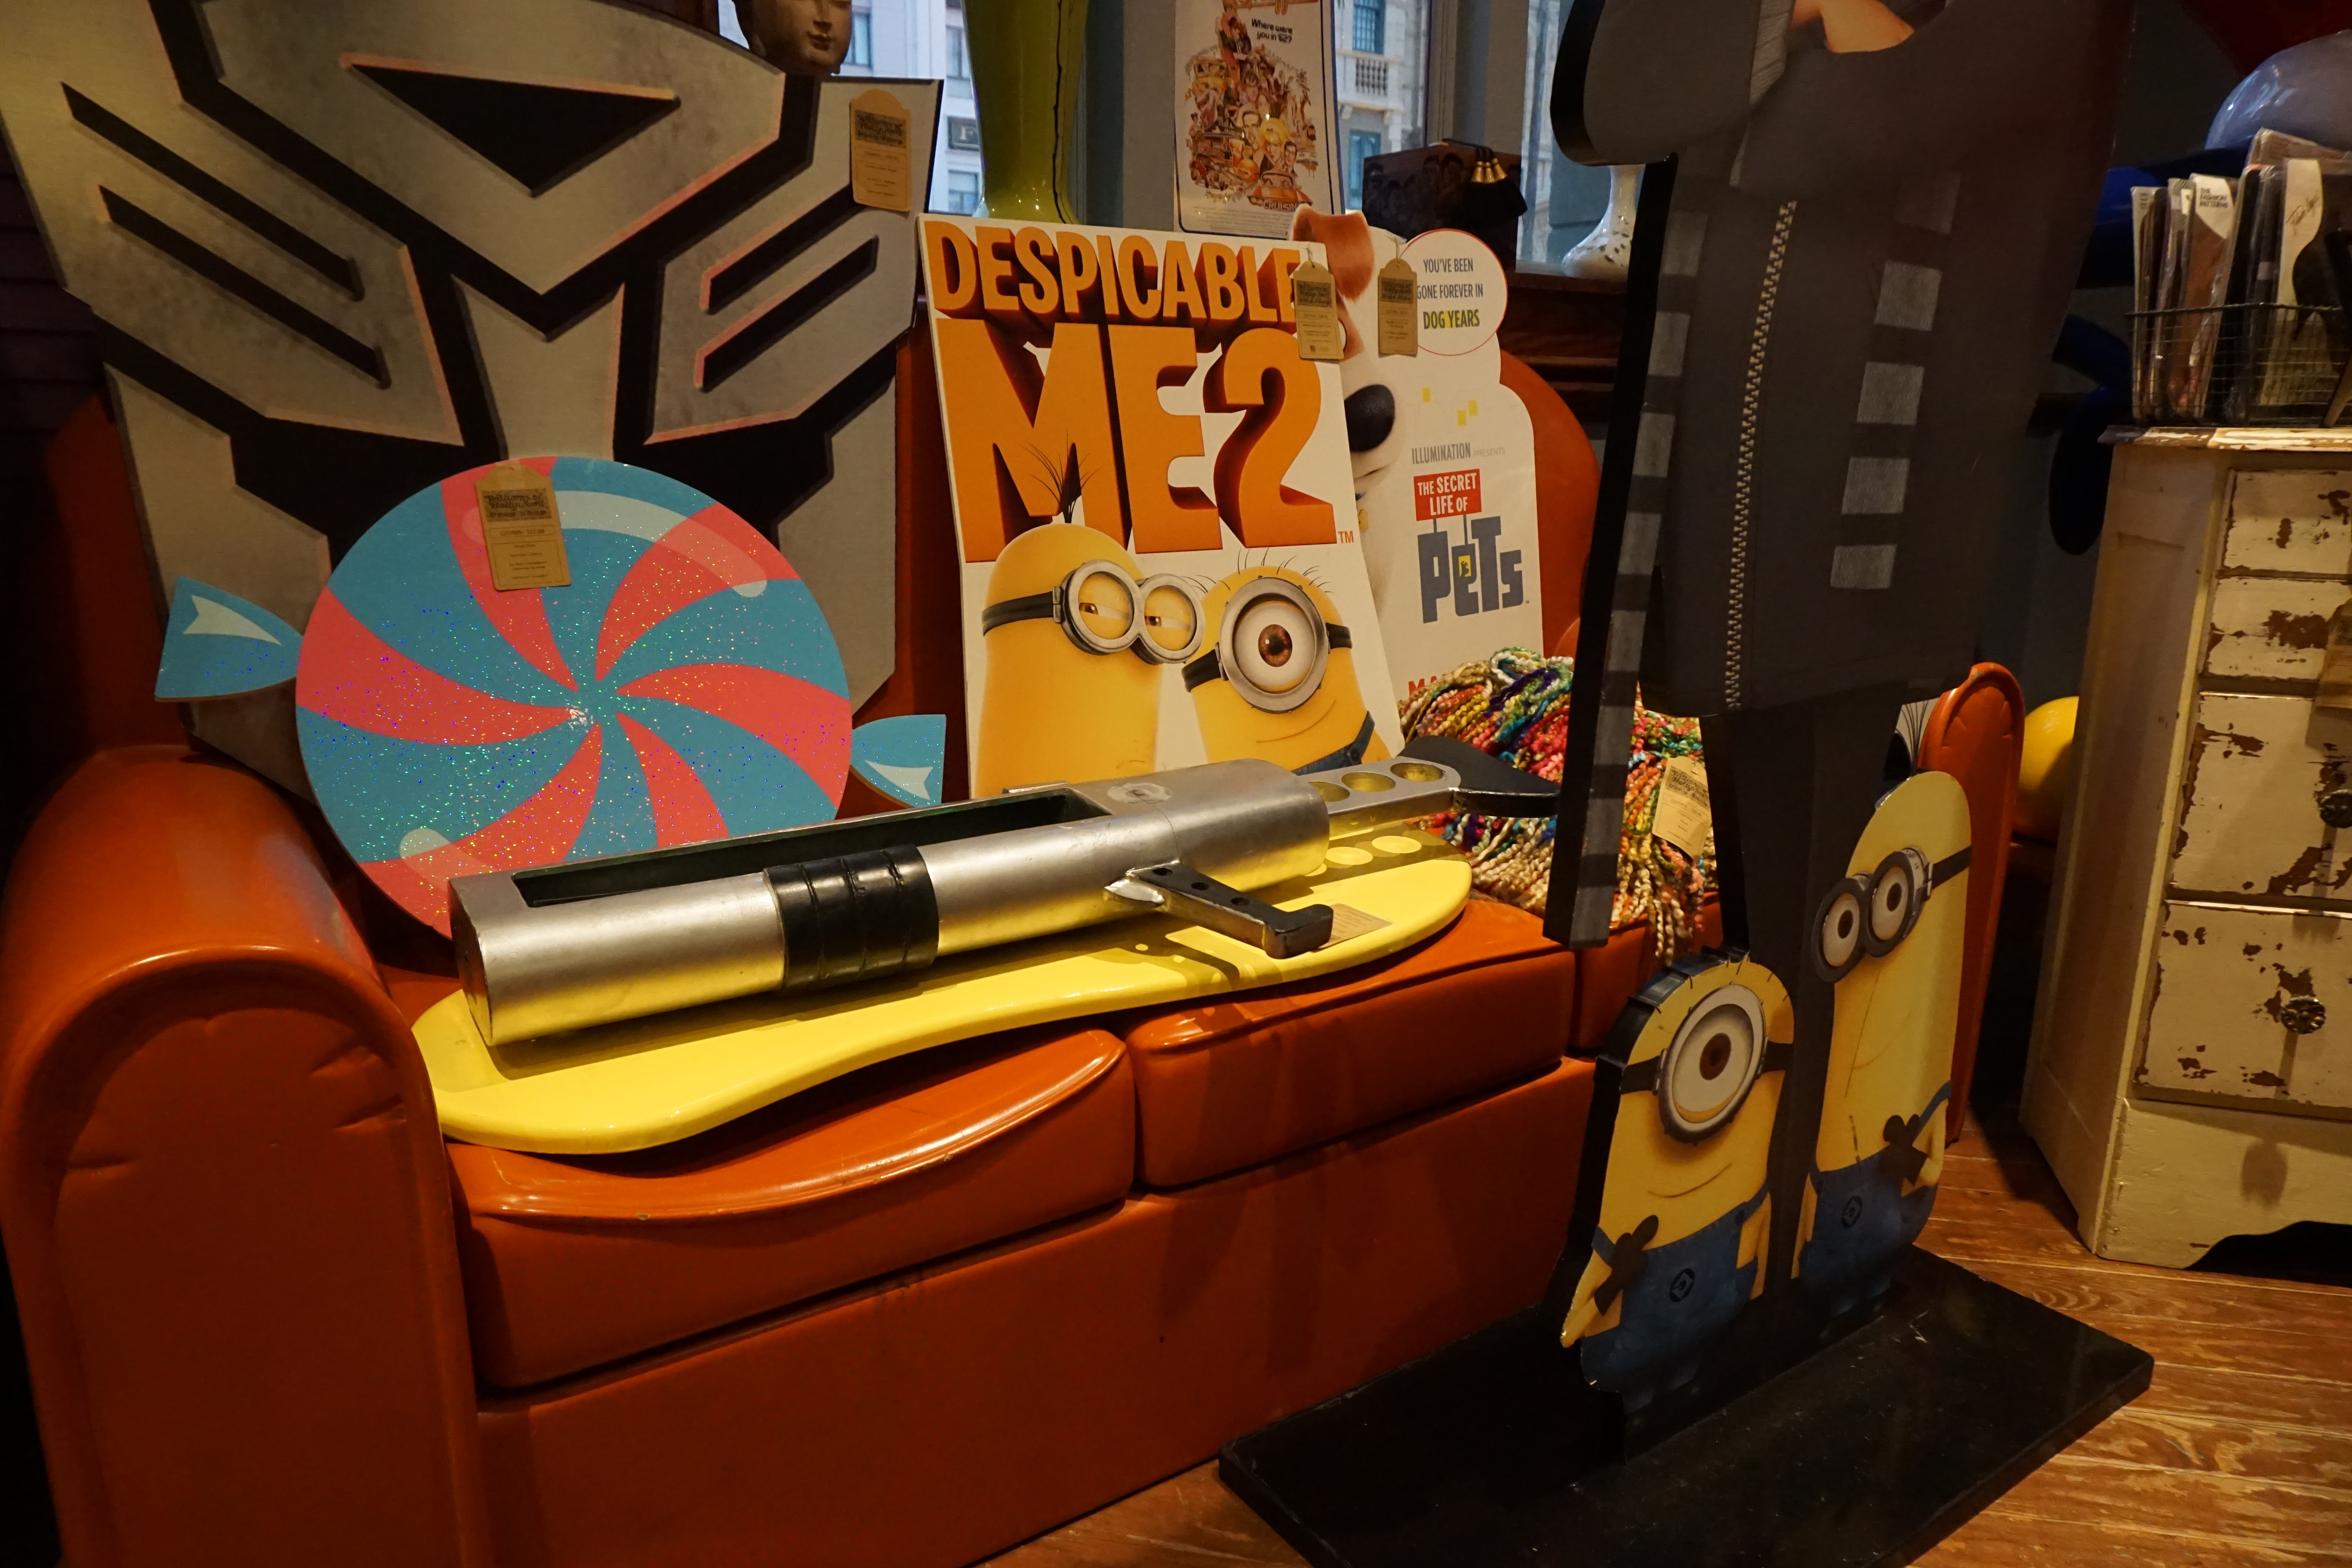 Despicable Me goods at Williams of Hollywood Prop Shop at Universal Studios Orlando - by unofficialuniversal.com.